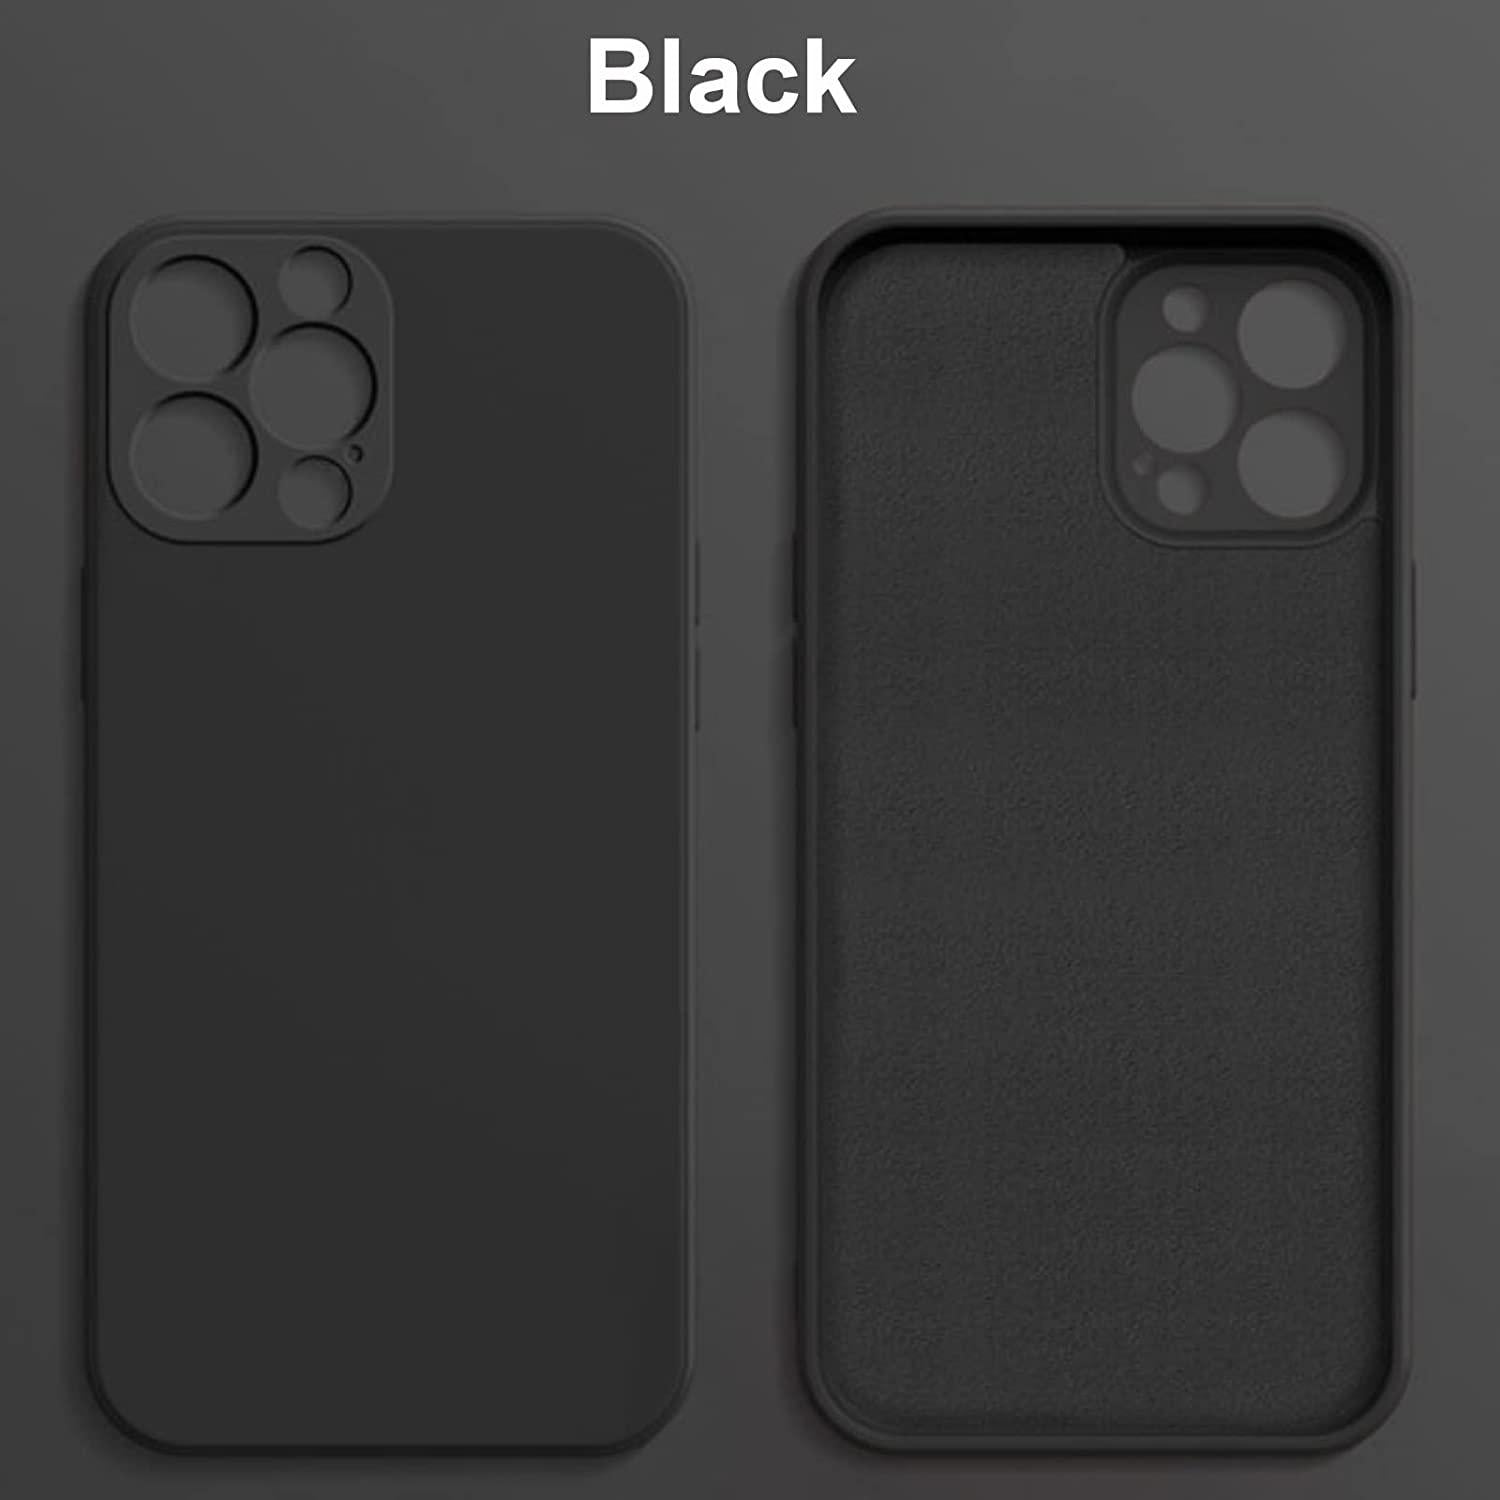 MH MOIHSING, Liquid Silicone Case Compatible with iPhone 13 Pro Max Case (6.7 ), MH MOIHSING Premium Silicone Phone Cover - Full Body Protection, 3 Layer Shockproof, Anti-Scratch Soft Microfiber Lining, Black